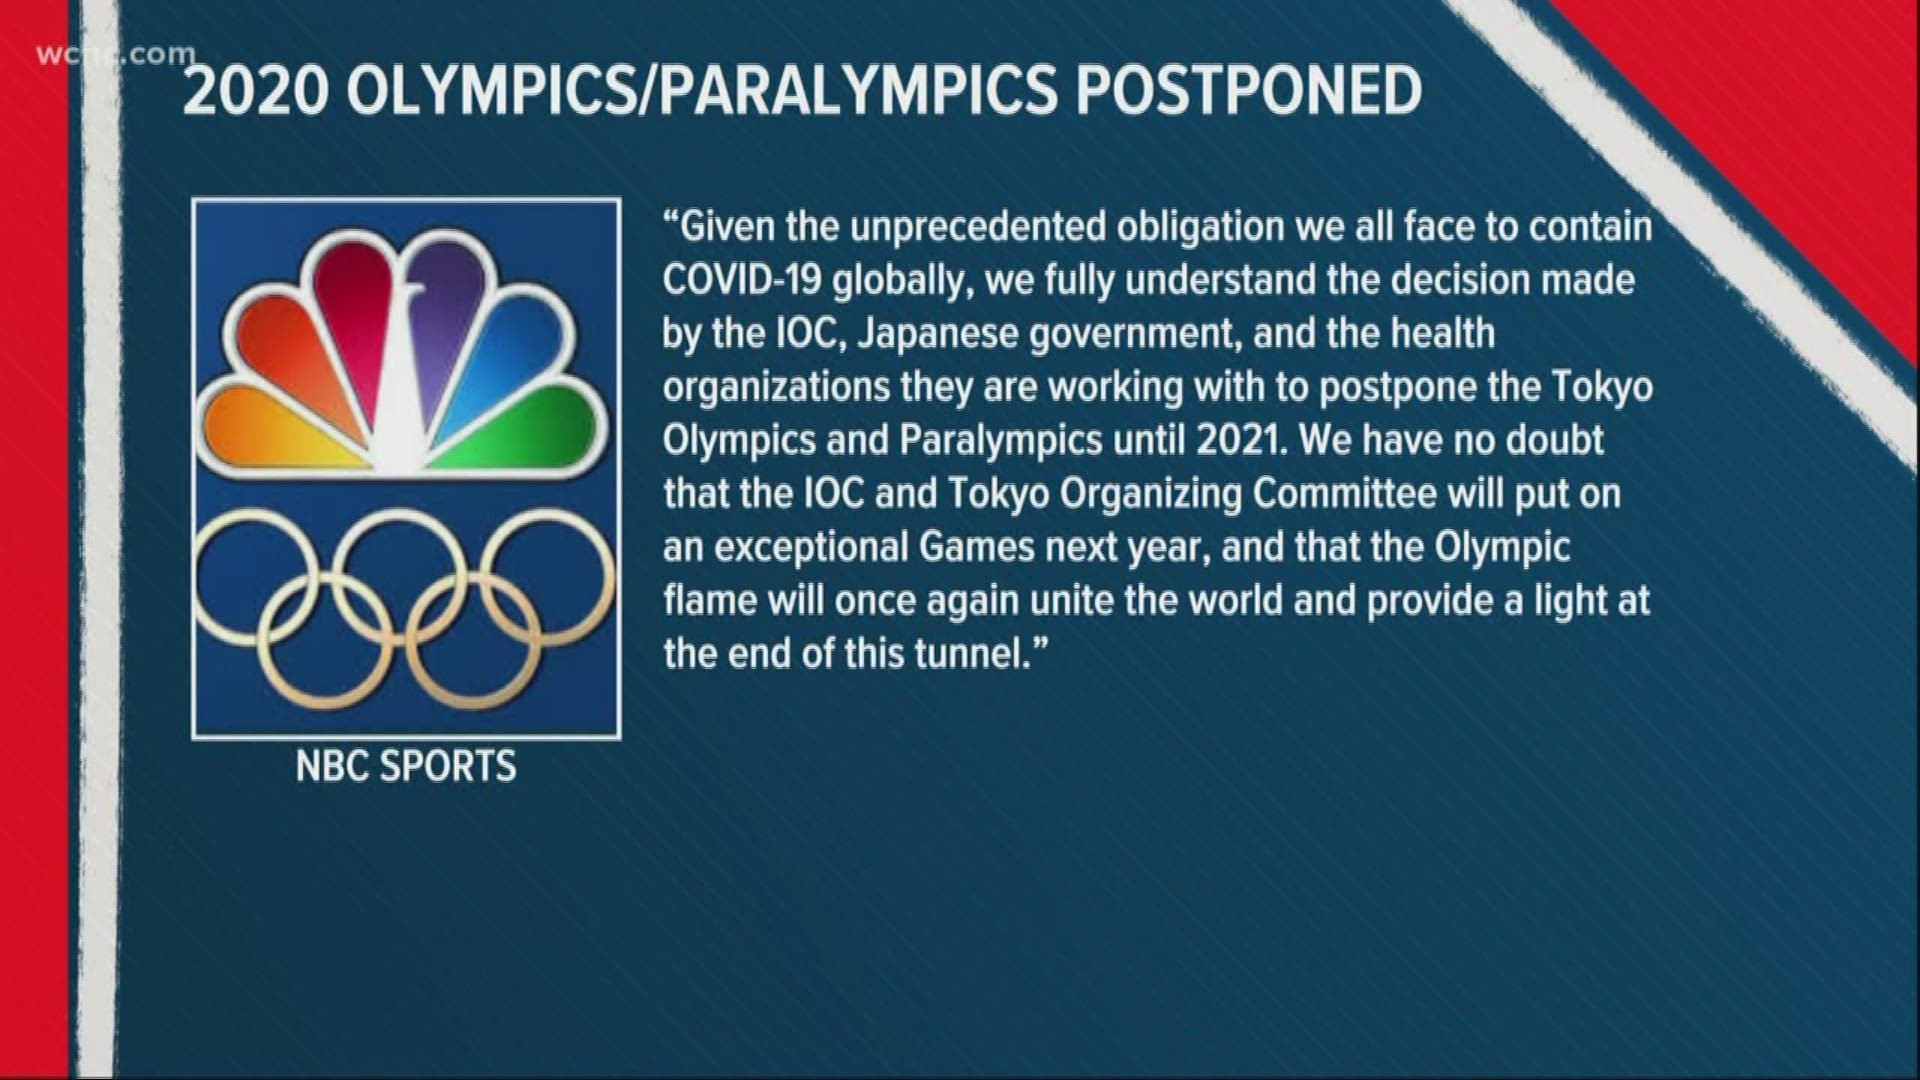 The IOC announced a first-of-its-kind postponement of the Summer Olympics, bowing to the realities of a coronavirus pandemic.